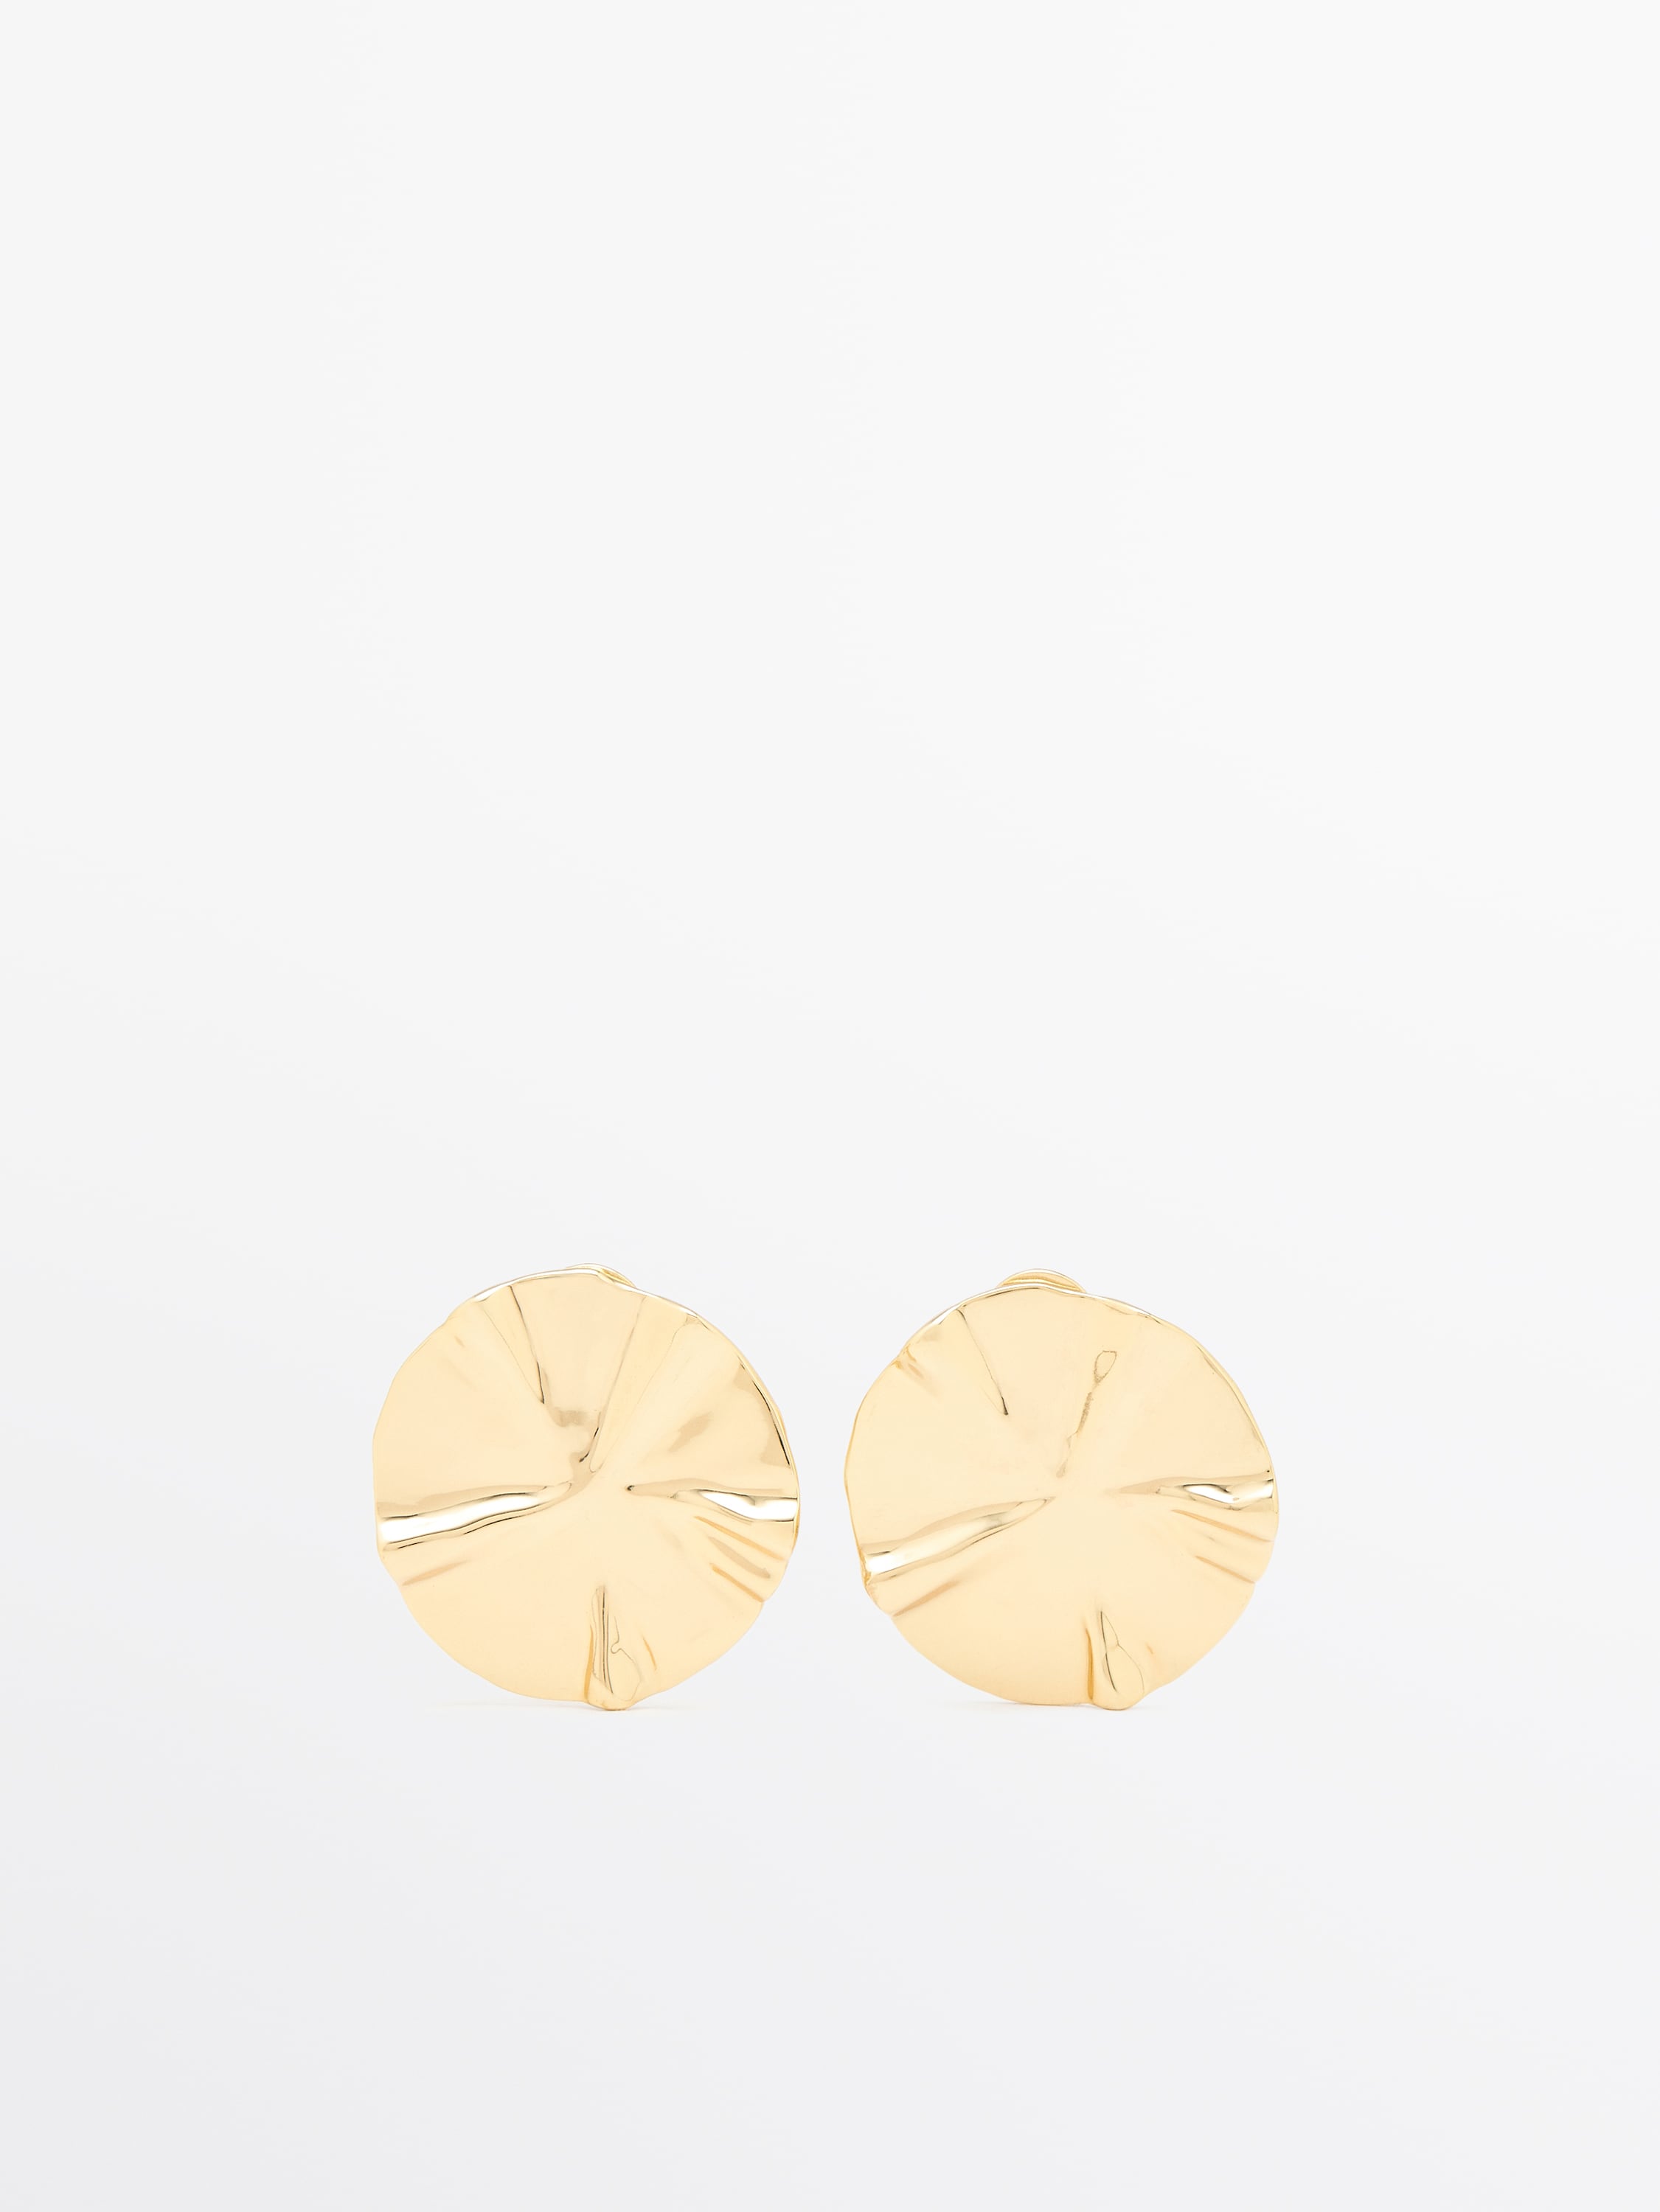 Earrings with textured piece detail